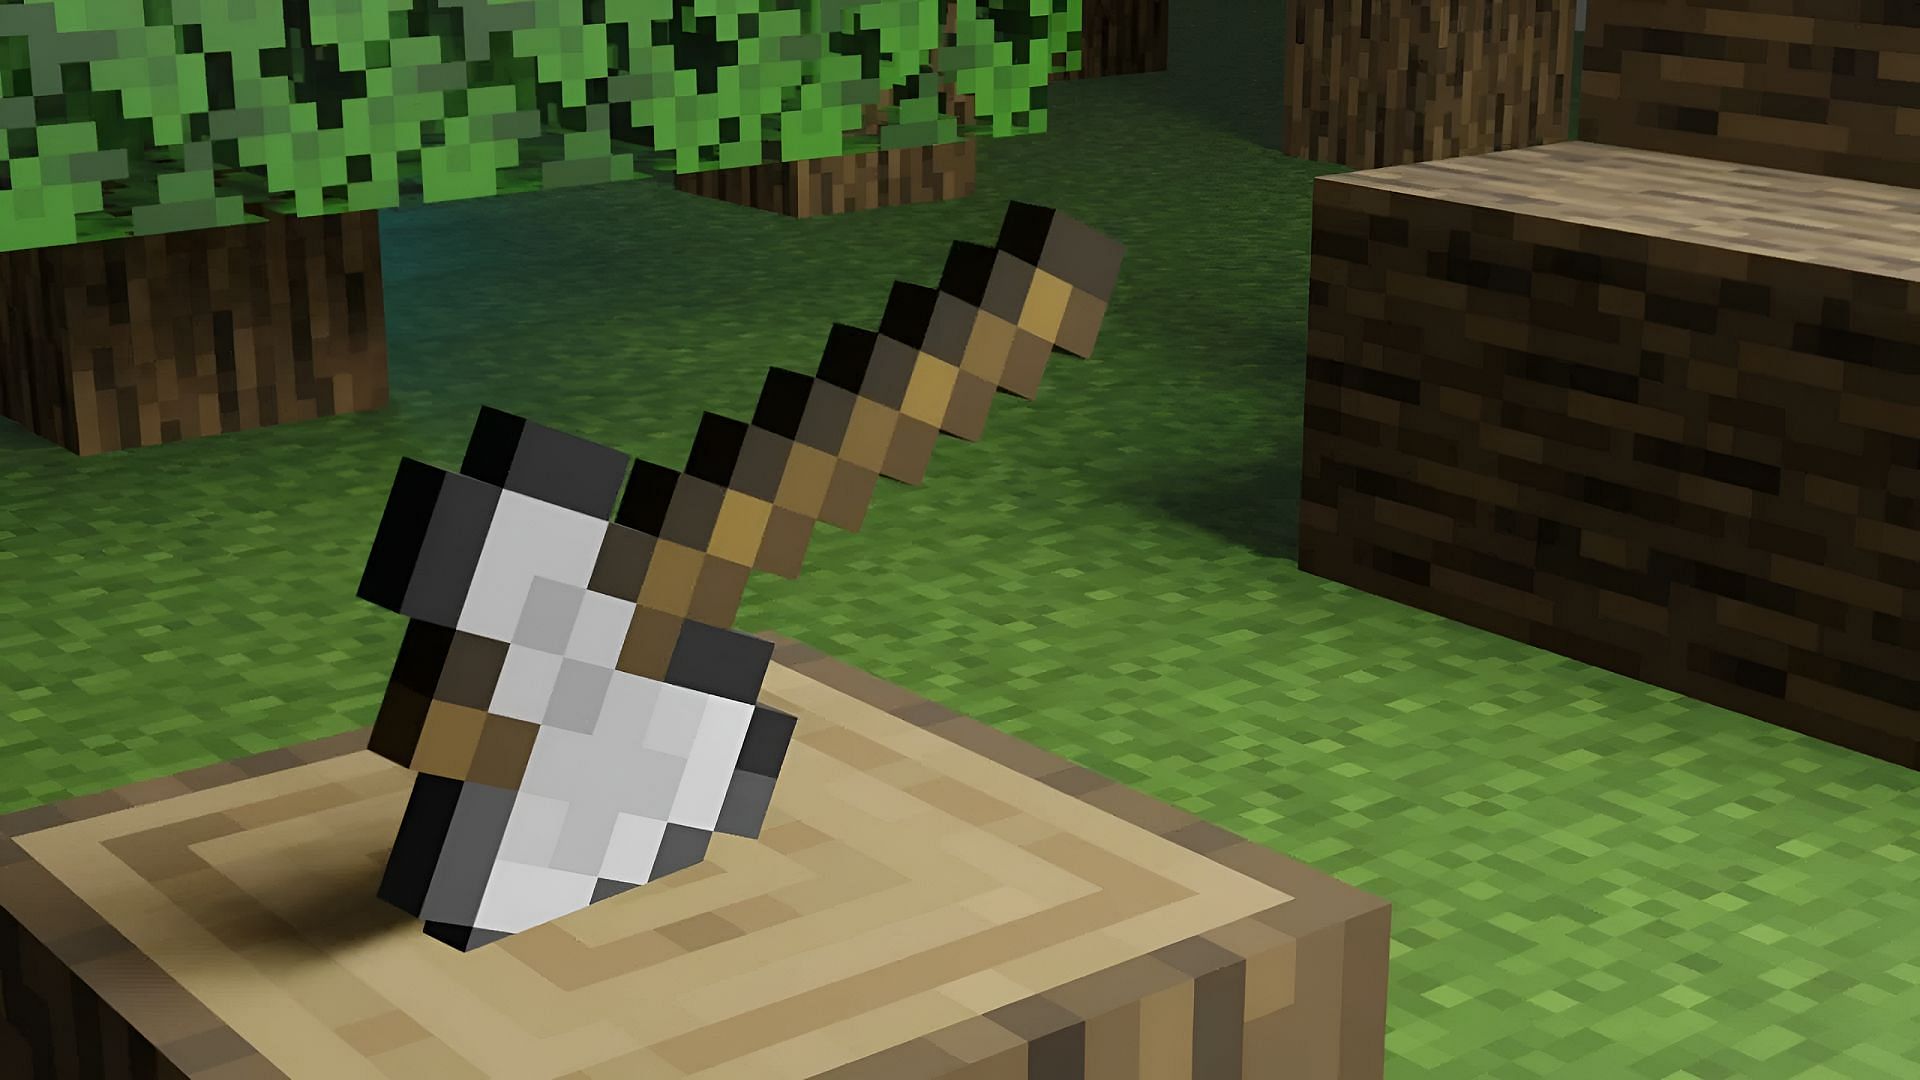 Axes are Weapons removes the penalties for using axes in Minecraft combat (Image via Mojang)